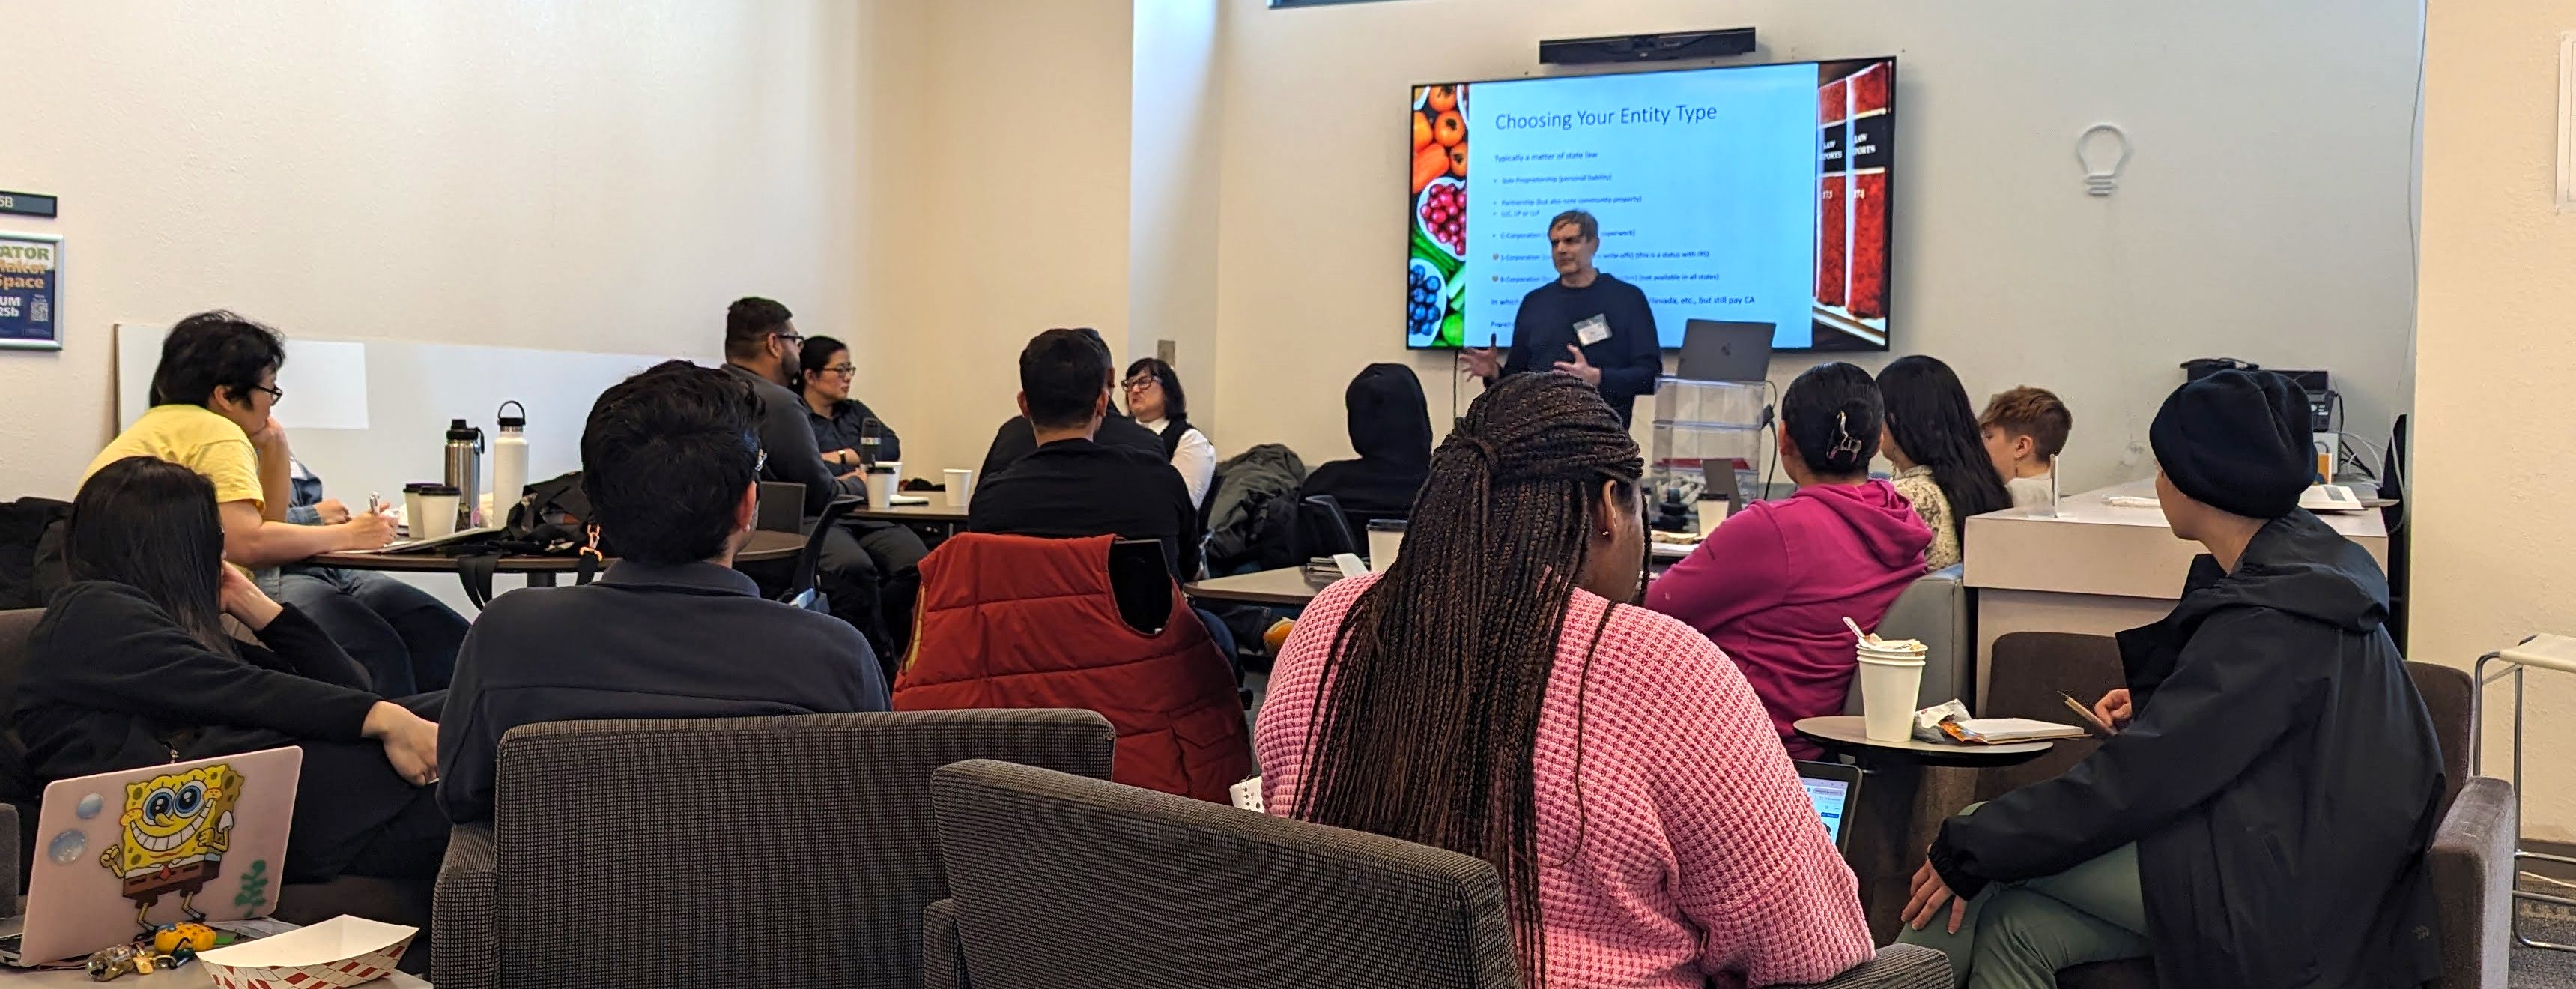 Mark Ciotola gives a presentation on legal issues for restaurant and food businesses at SFSU's restaurant entrepreneurship bootcamp.